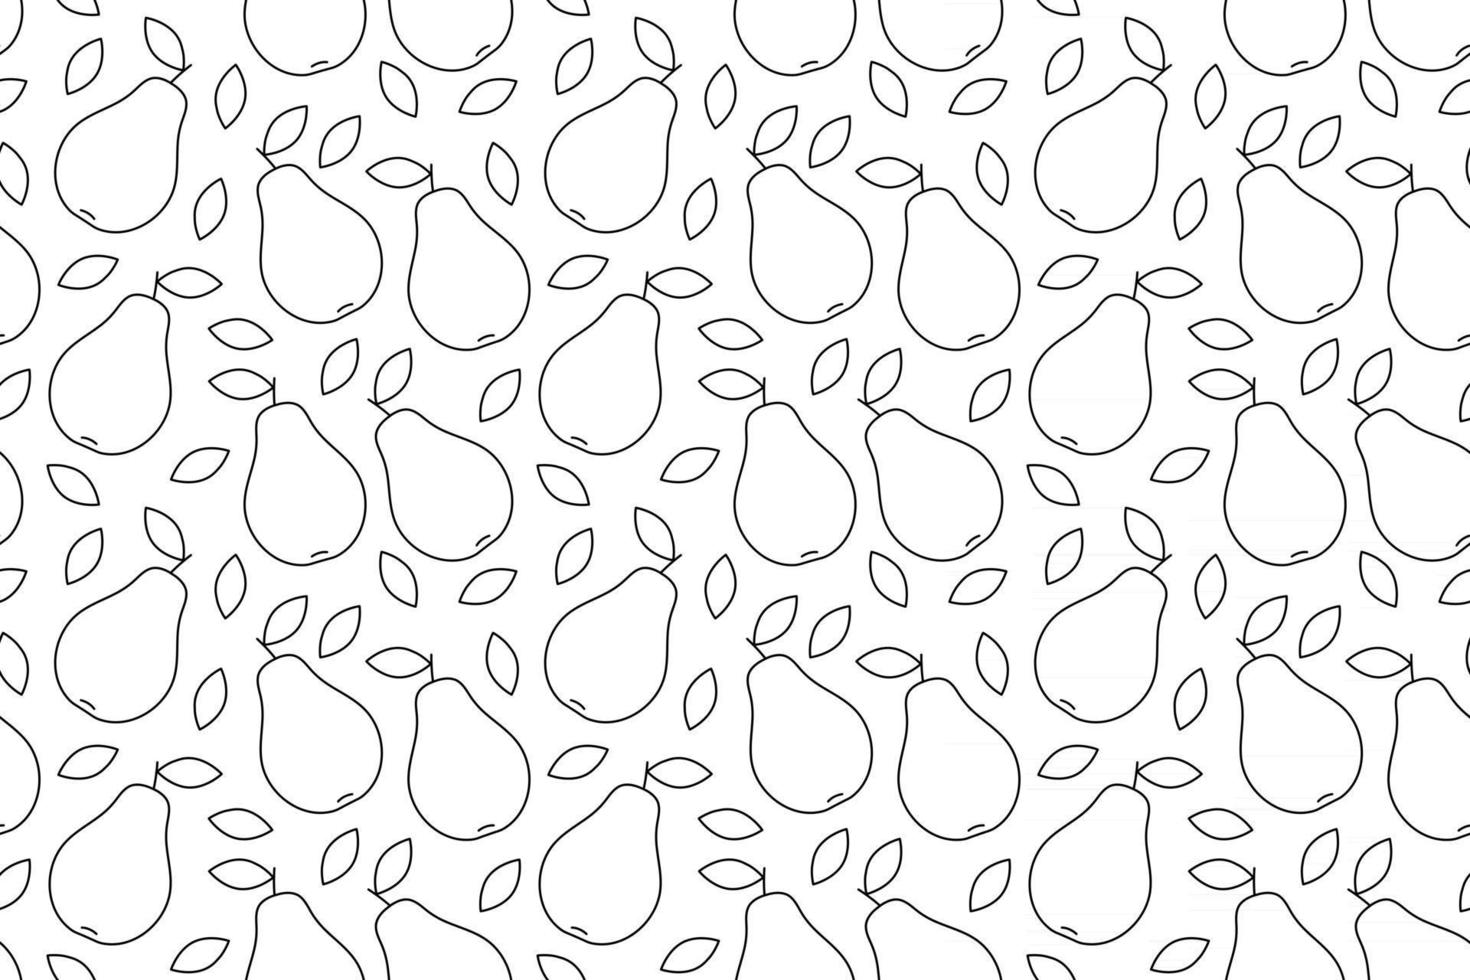 Pears seamless pattern vector